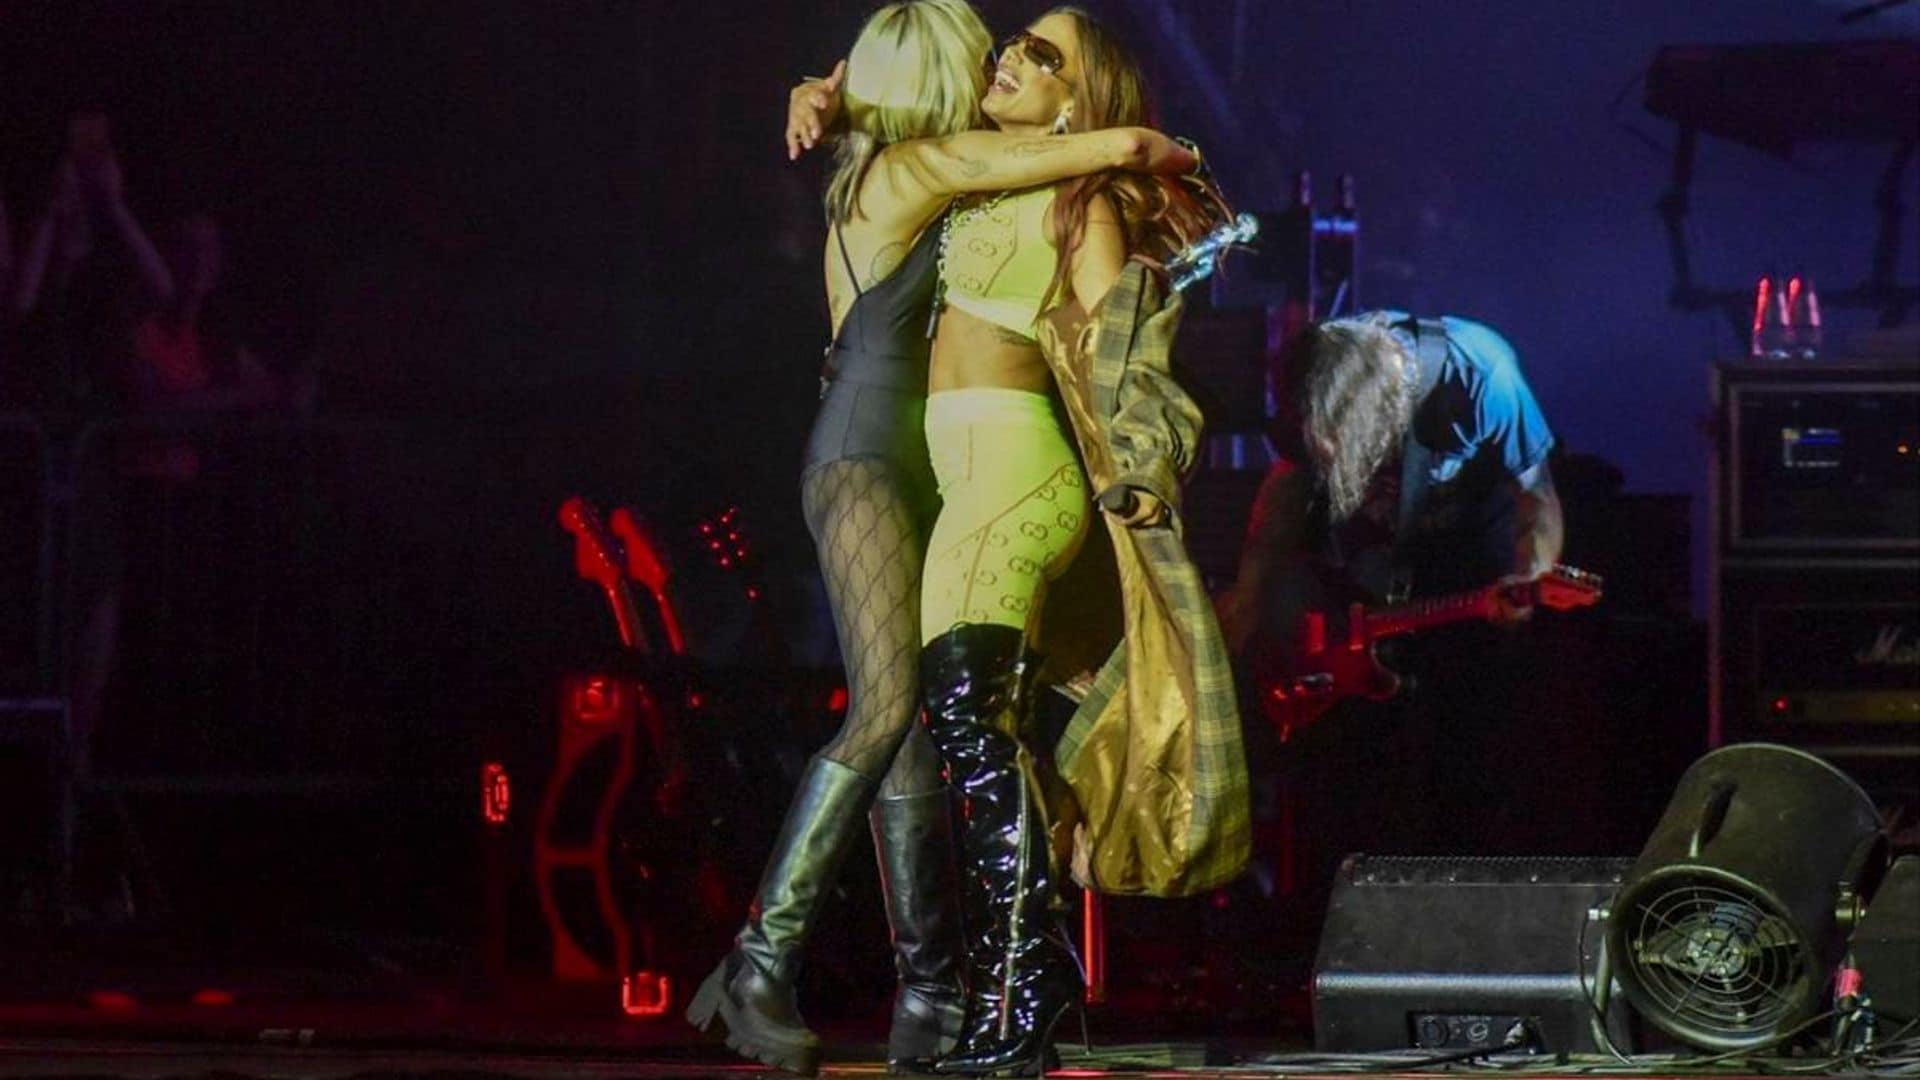 Anitta joins Miley Cyrus on stage in Brazil during concert dedicated to Taylor Hawkins